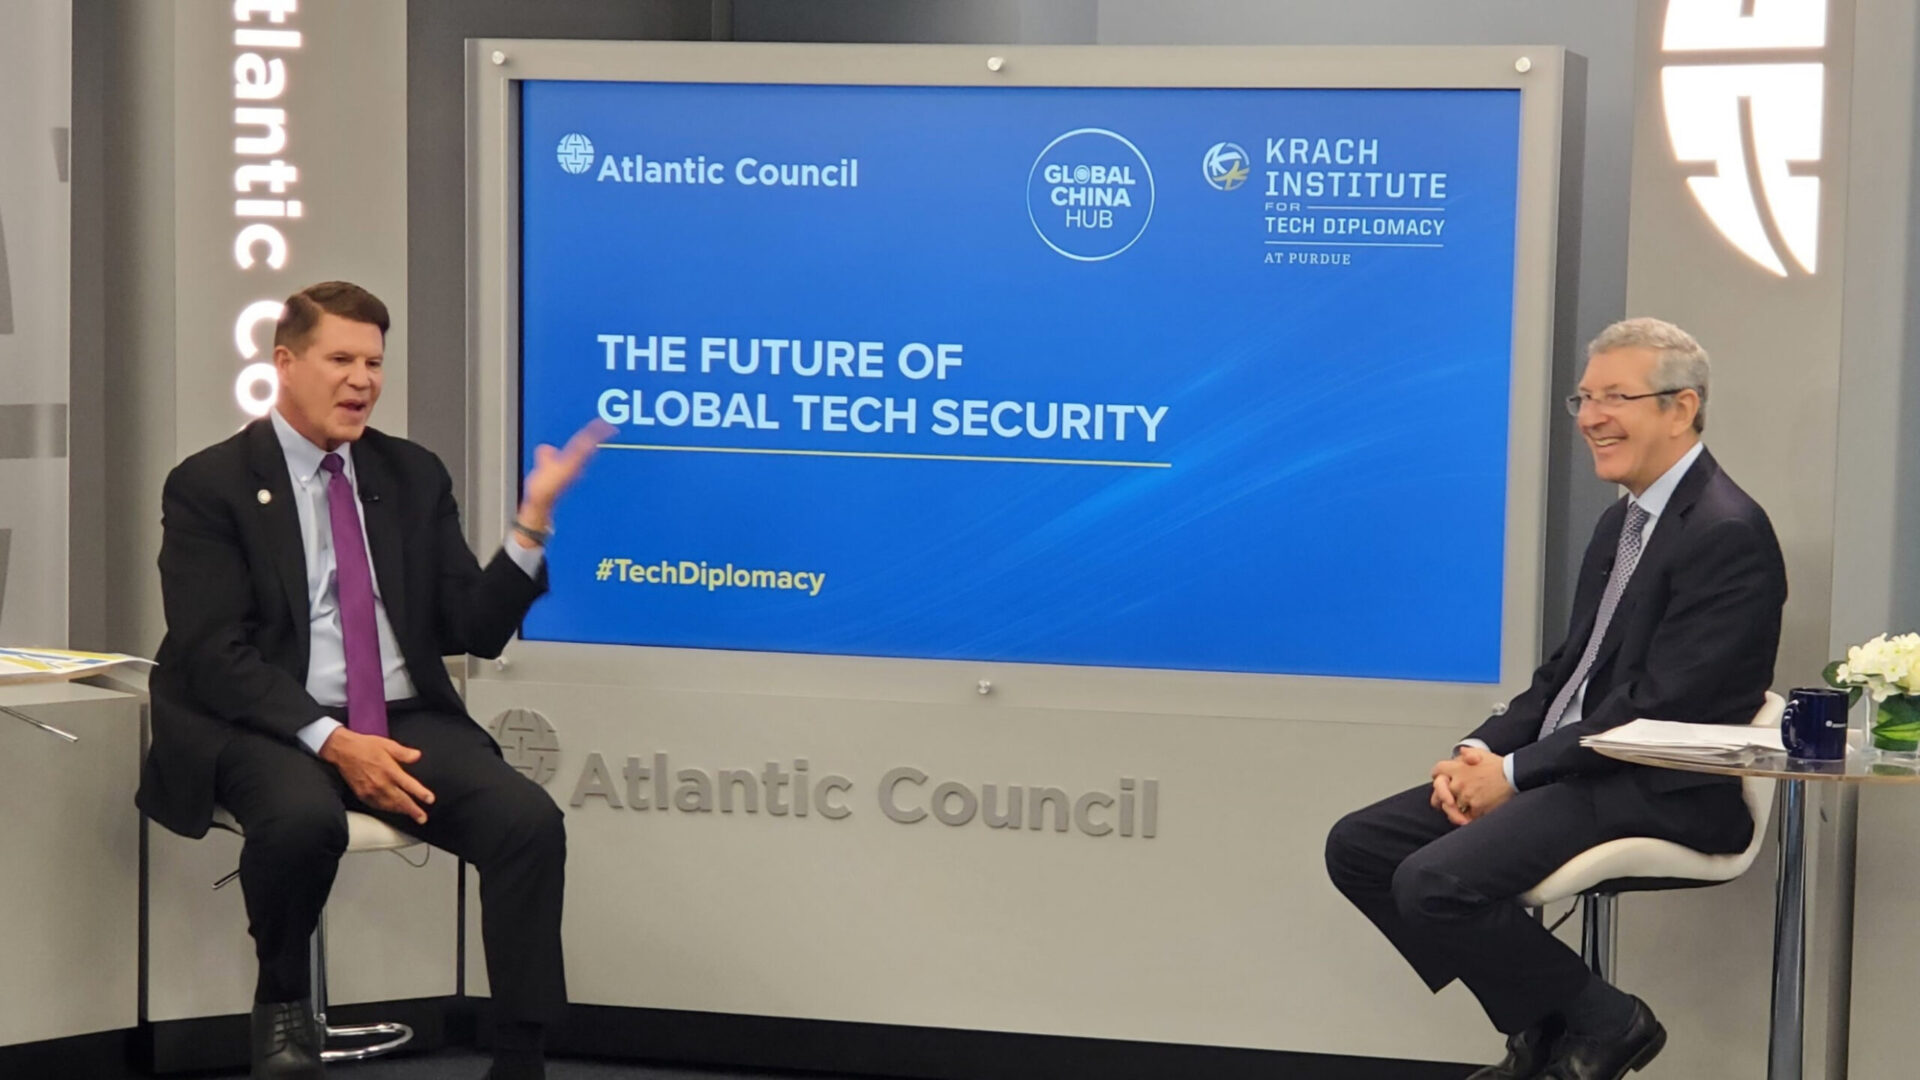 Keith Krach and Biden “Chief Technology Protection Officer” Alan Estevez Discuss Advancing Freedom Through Trusted Tech